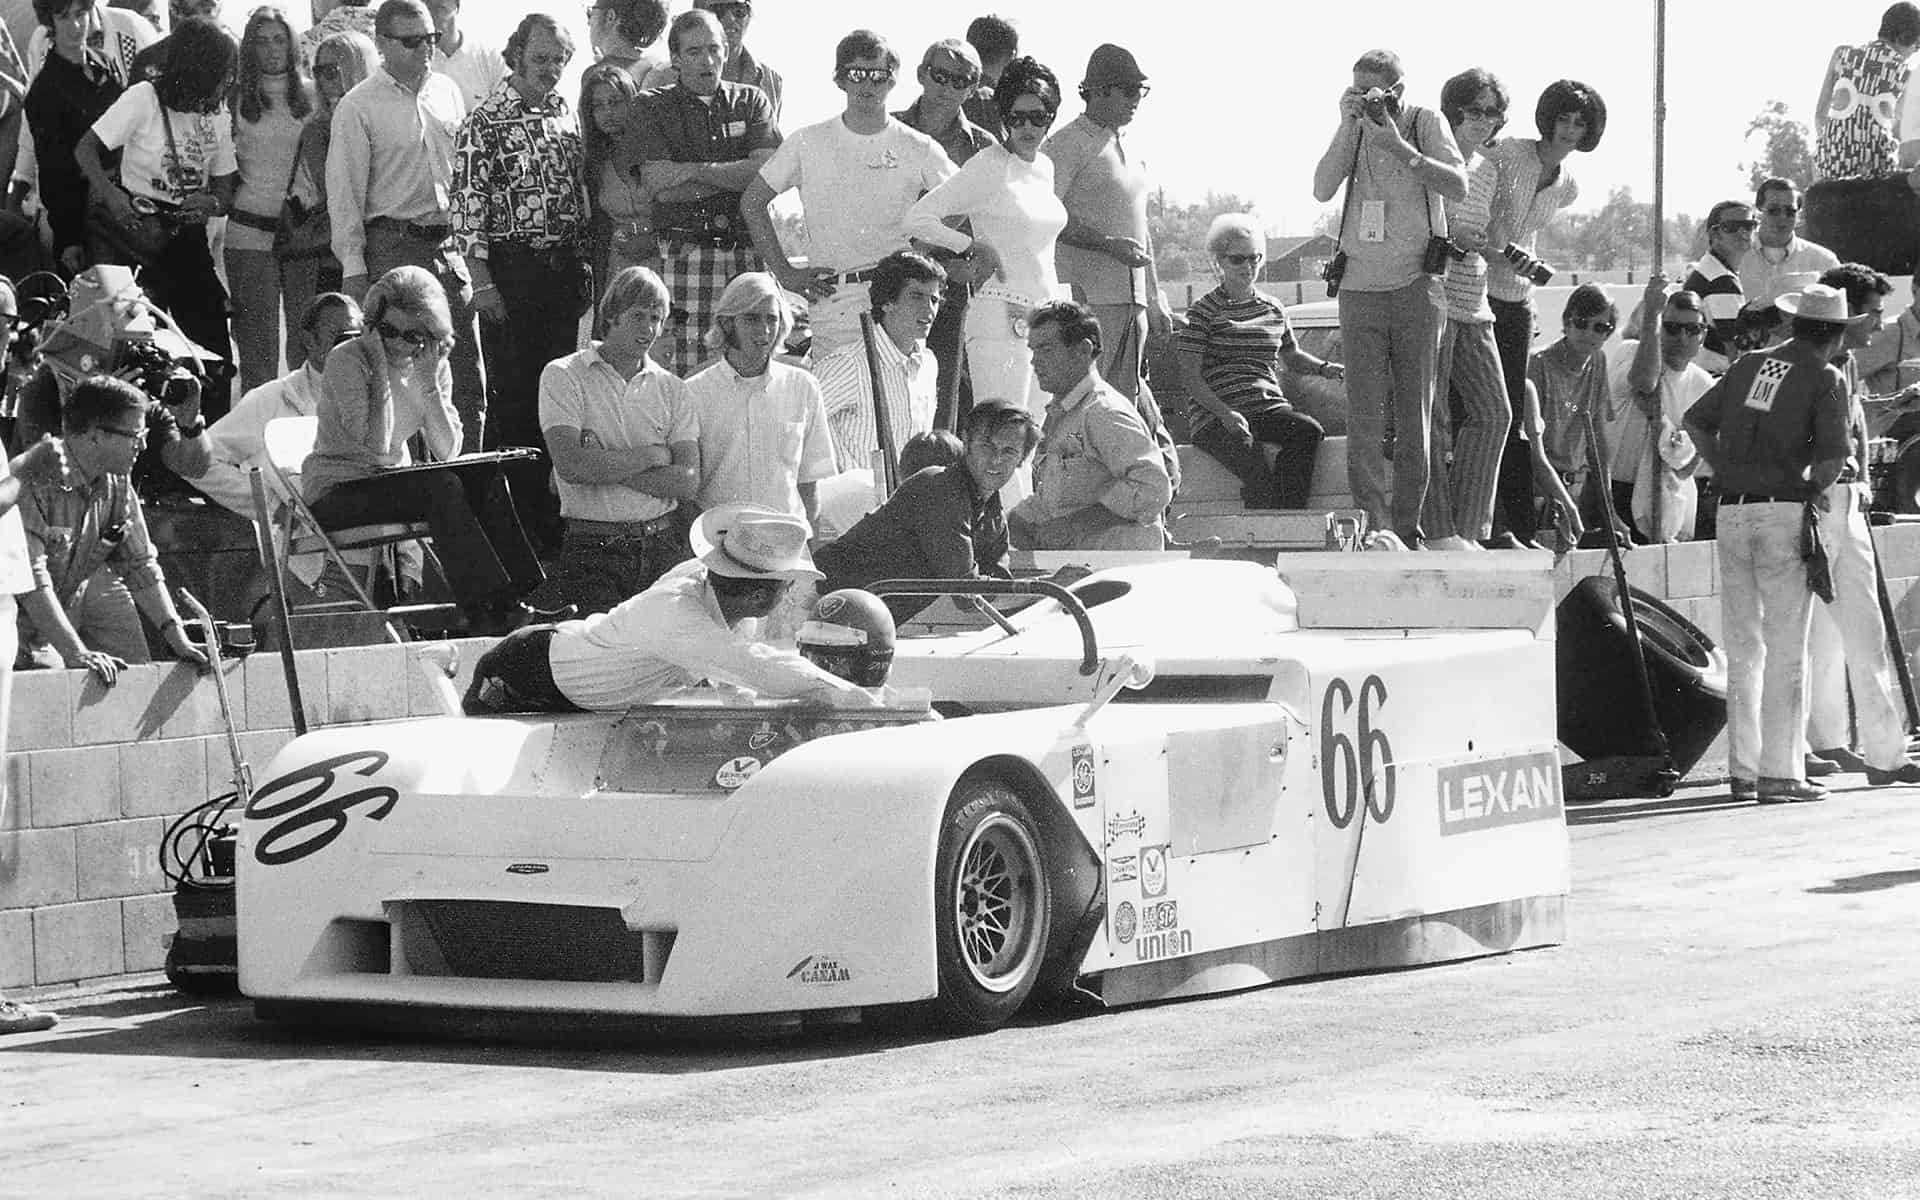 The Chaparral 2J: The Can-Am series had seen nothing like it!